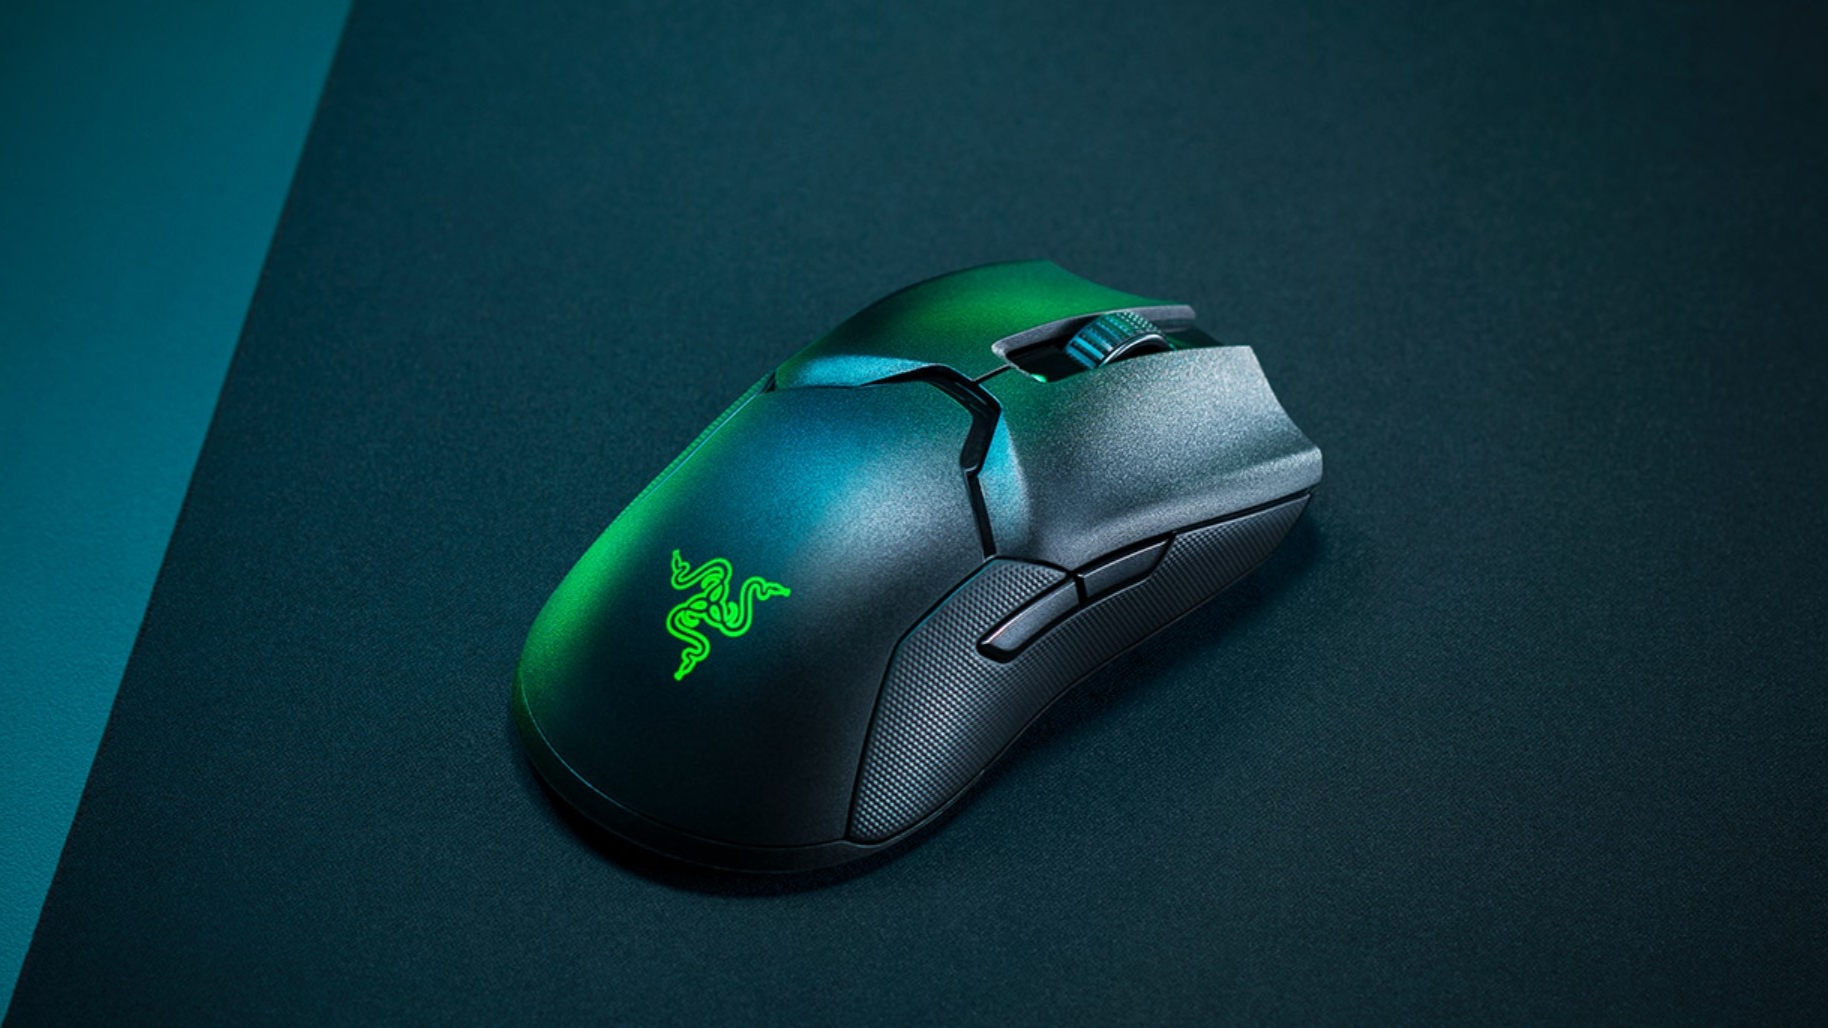 The Razer Viper Ultimate gaming mouse.